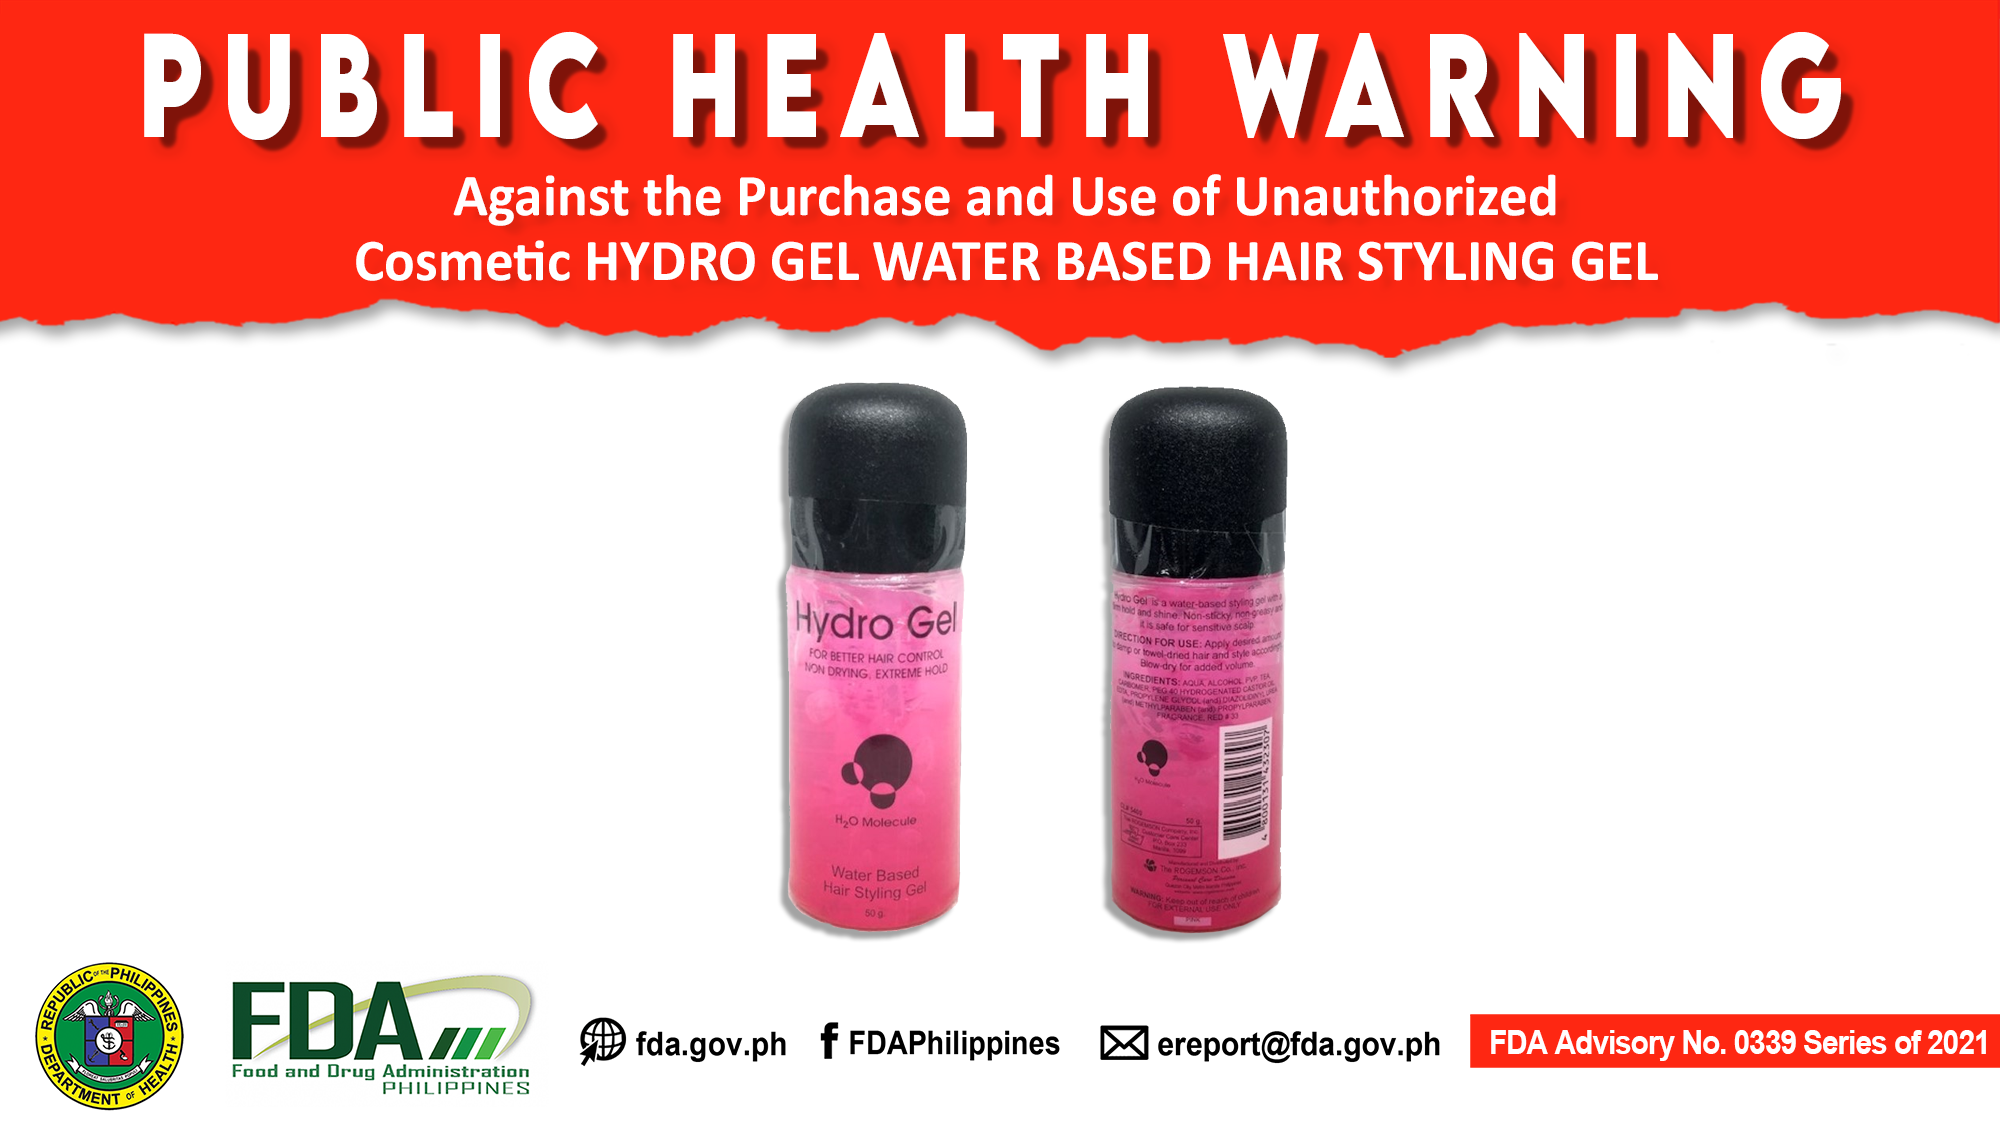 FDA Advisory  || Public Health Warning Against the Purchase and  Use of Unauthorized Cosmetic HYDRO GEL WATER BASED HAIR STYLING GEL - Food  and Drug Administration